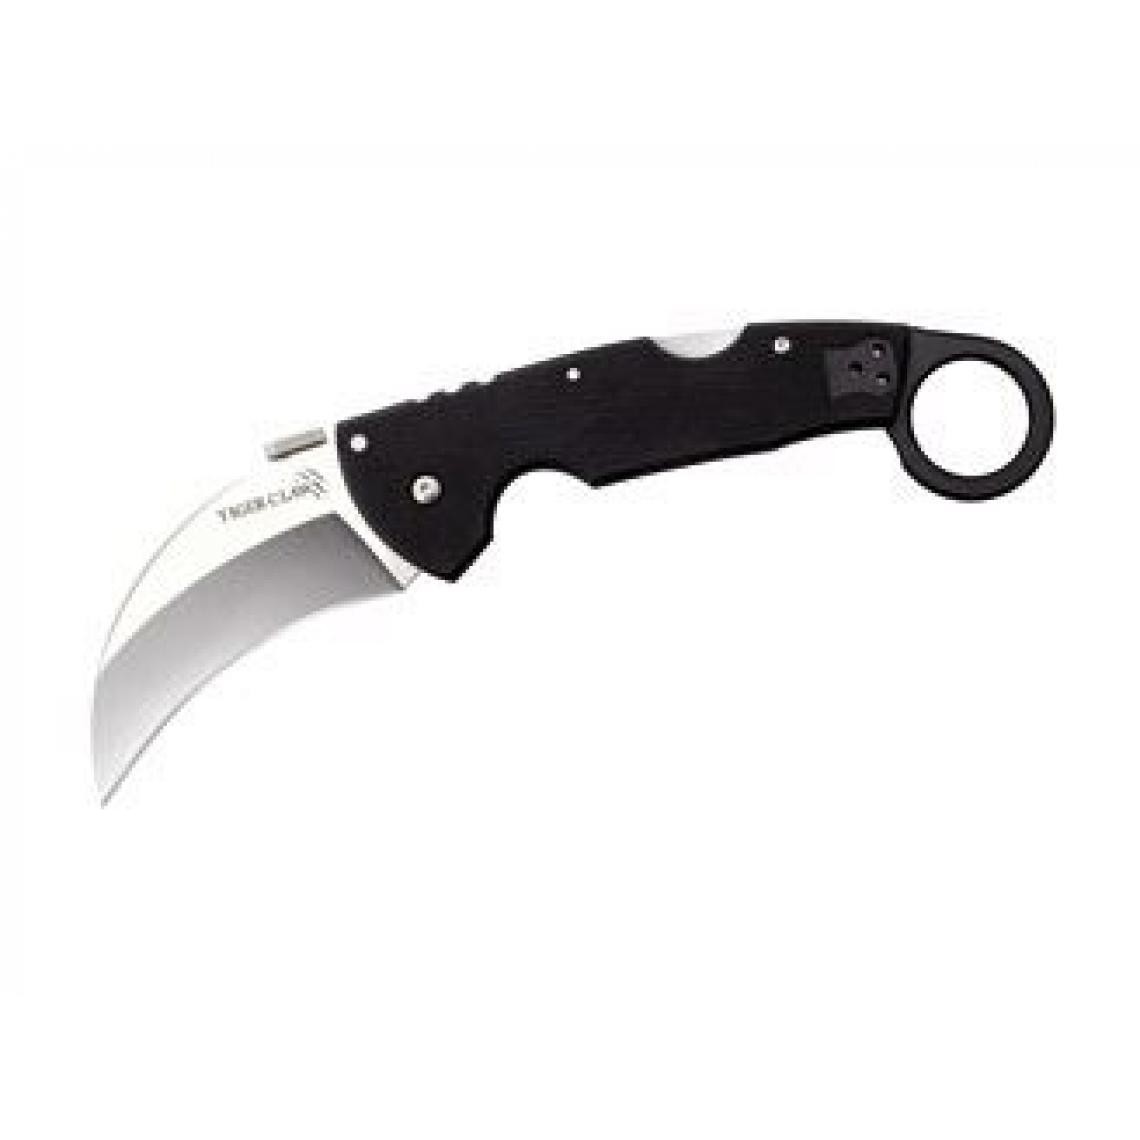 Divers Marques - Cold Steel TIGER CLAW PLAN EDGE 22C - Outils de coupe